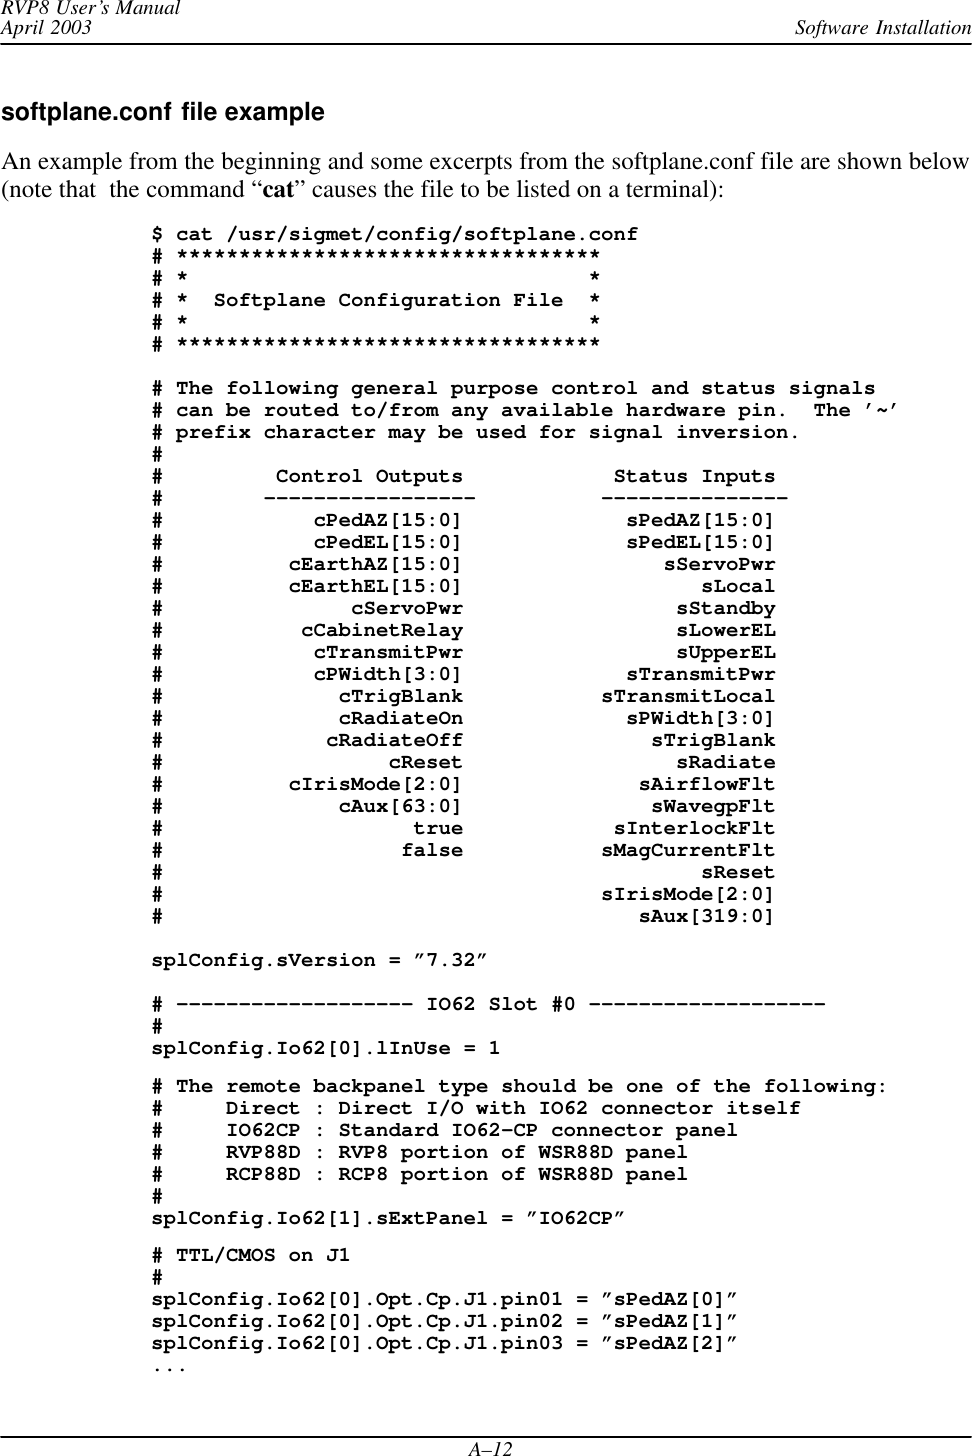 Software InstallationRVP8 User’s ManualApril 2003A–12softplane.conf file exampleAn example from the beginning and some excerpts from the softplane.conf file are shown below(note that  the command “cat” causes the file to be listed on a terminal):$ cat /usr/sigmet/config/softplane.conf# **********************************# *                                *# *  Softplane Configuration File  *# *                                *# **********************************# The following general purpose control and status signals# can be routed to/from any available hardware pin.  The ’~’# prefix character may be used for signal inversion. ##         Control Outputs            Status Inputs#        –––––––––––––––––          –––––––––––––––#            cPedAZ[15:0]             sPedAZ[15:0]#            cPedEL[15:0]             sPedEL[15:0]#          cEarthAZ[15:0]                sServoPwr#          cEarthEL[15:0]                   sLocal#               cServoPwr                 sStandby#           cCabinetRelay                 sLowerEL#            cTransmitPwr                 sUpperEL#            cPWidth[3:0]             sTransmitPwr#              cTrigBlank           sTransmitLocal#              cRadiateOn             sPWidth[3:0]#             cRadiateOff               sTrigBlank#                  cReset                 sRadiate#          cIrisMode[2:0]              sAirflowFlt#              cAux[63:0]               sWavegpFlt#                    true            sInterlockFlt#                   false           sMagCurrentFlt#                                           sReset#                                   sIrisMode[2:0]#                                      sAux[319:0]splConfig.sVersion = ”7.32”# ––––––––––––––––––– IO62 Slot #0 –––––––––––––––––––#splConfig.Io62[0].lInUse = 1# The remote backpanel type should be one of the following:#     Direct : Direct I/O with IO62 connector itself#     IO62CP : Standard IO62–CP connector panel#     RVP88D : RVP8 portion of WSR88D panel#     RCP88D : RCP8 portion of WSR88D panel#splConfig.Io62[1].sExtPanel = ”IO62CP”# TTL/CMOS on J1#splConfig.Io62[0].Opt.Cp.J1.pin01 = ”sPedAZ[0]”splConfig.Io62[0].Opt.Cp.J1.pin02 = ”sPedAZ[1]”splConfig.Io62[0].Opt.Cp.J1.pin03 = ”sPedAZ[2]”...